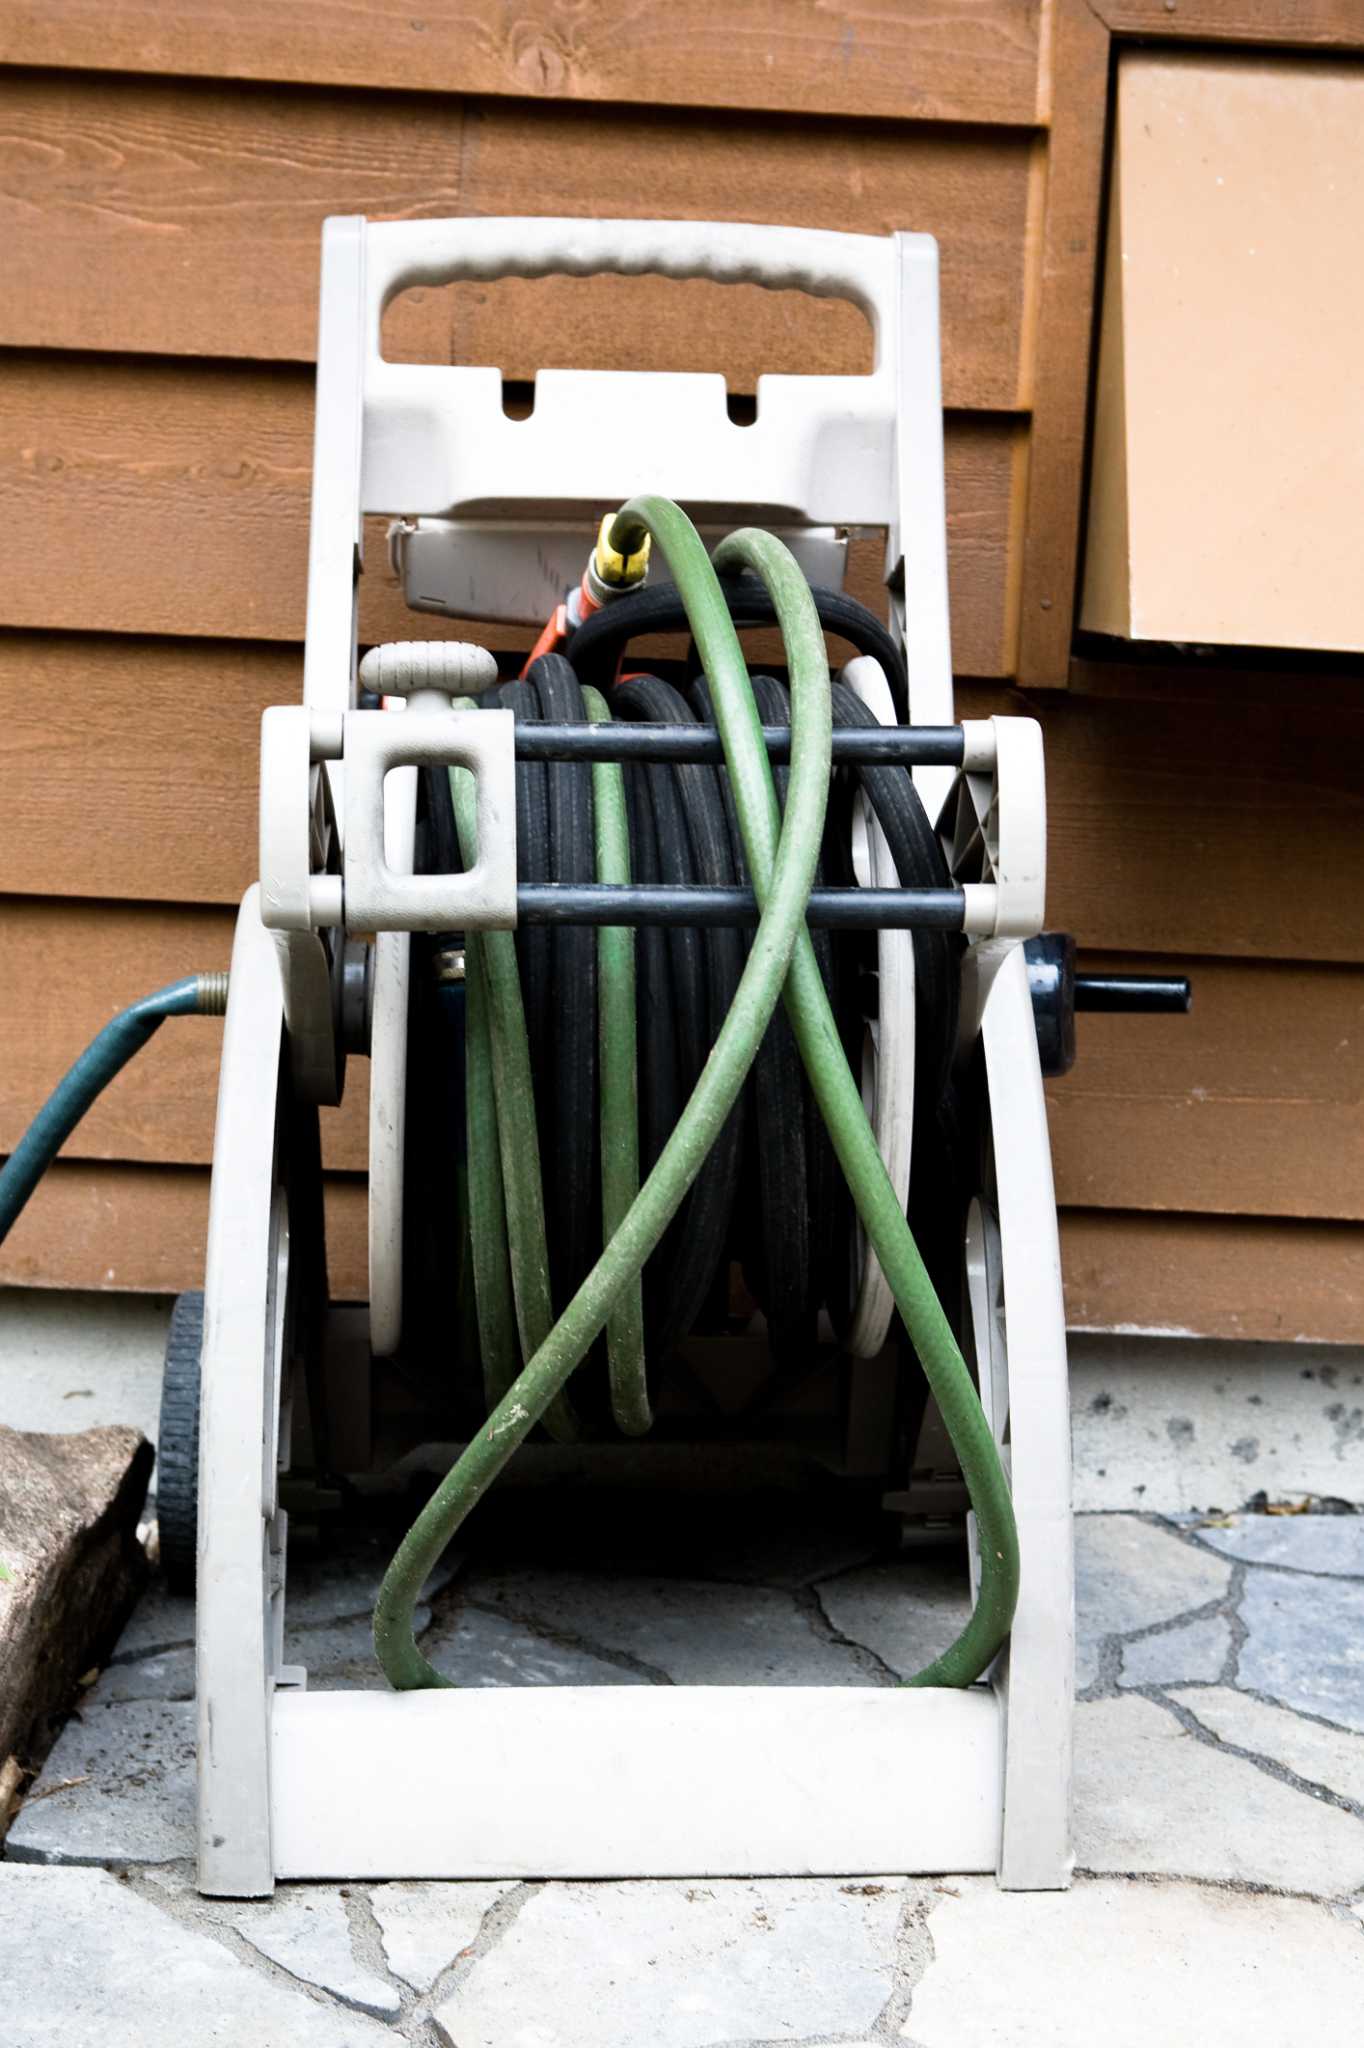 How Do I Connect Two Different Diameter Garden Hoses?